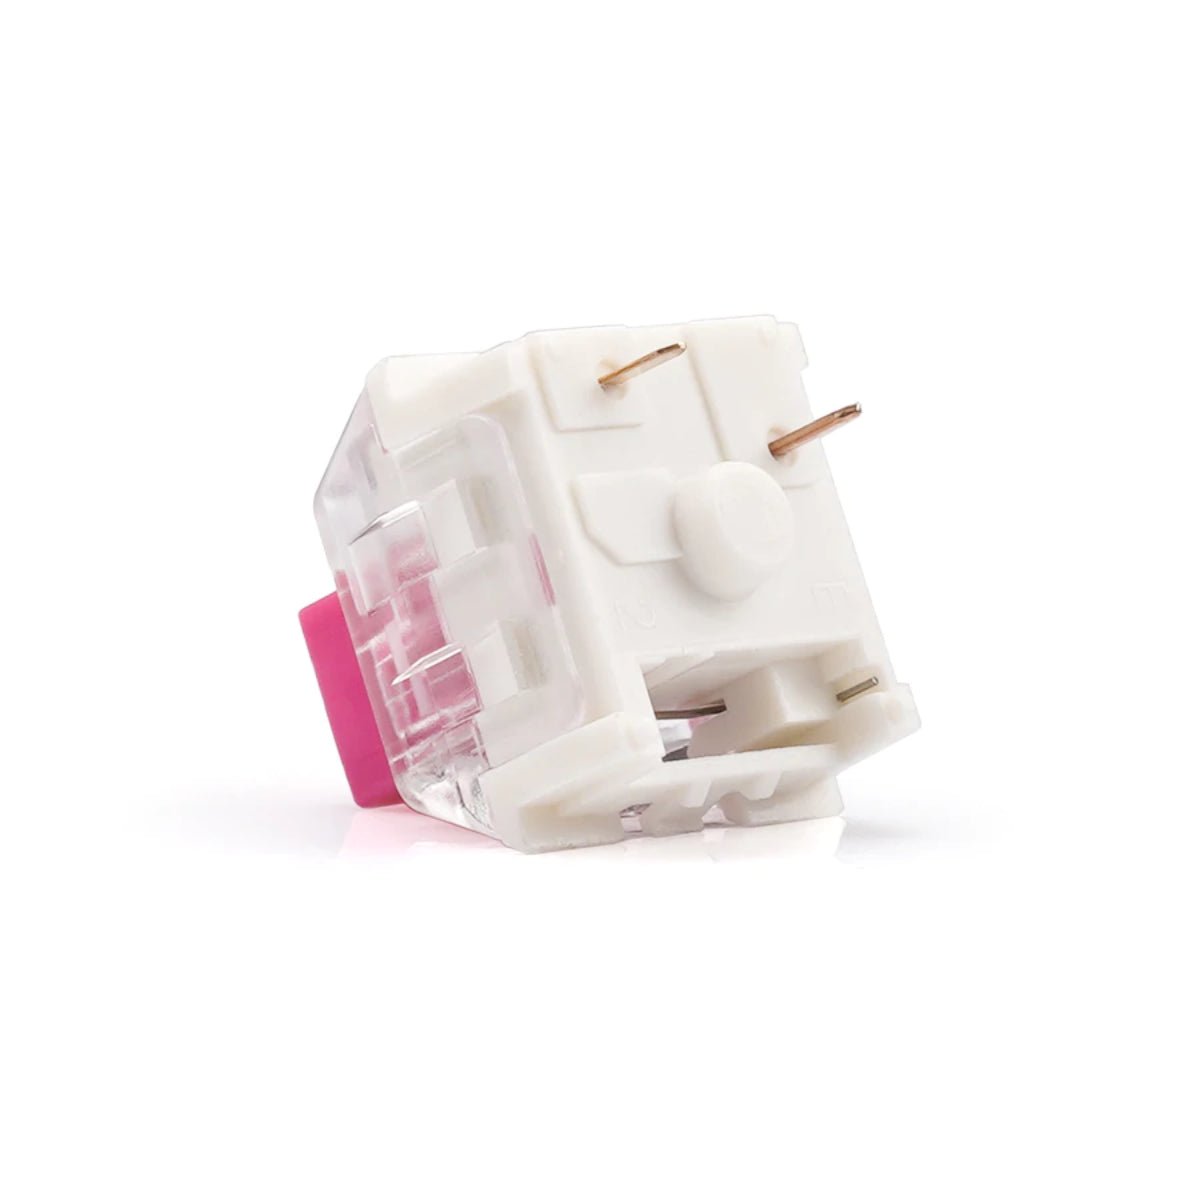 KBD Fans TTC Linear Switches - Gold Pink - Store 974 | ستور ٩٧٤